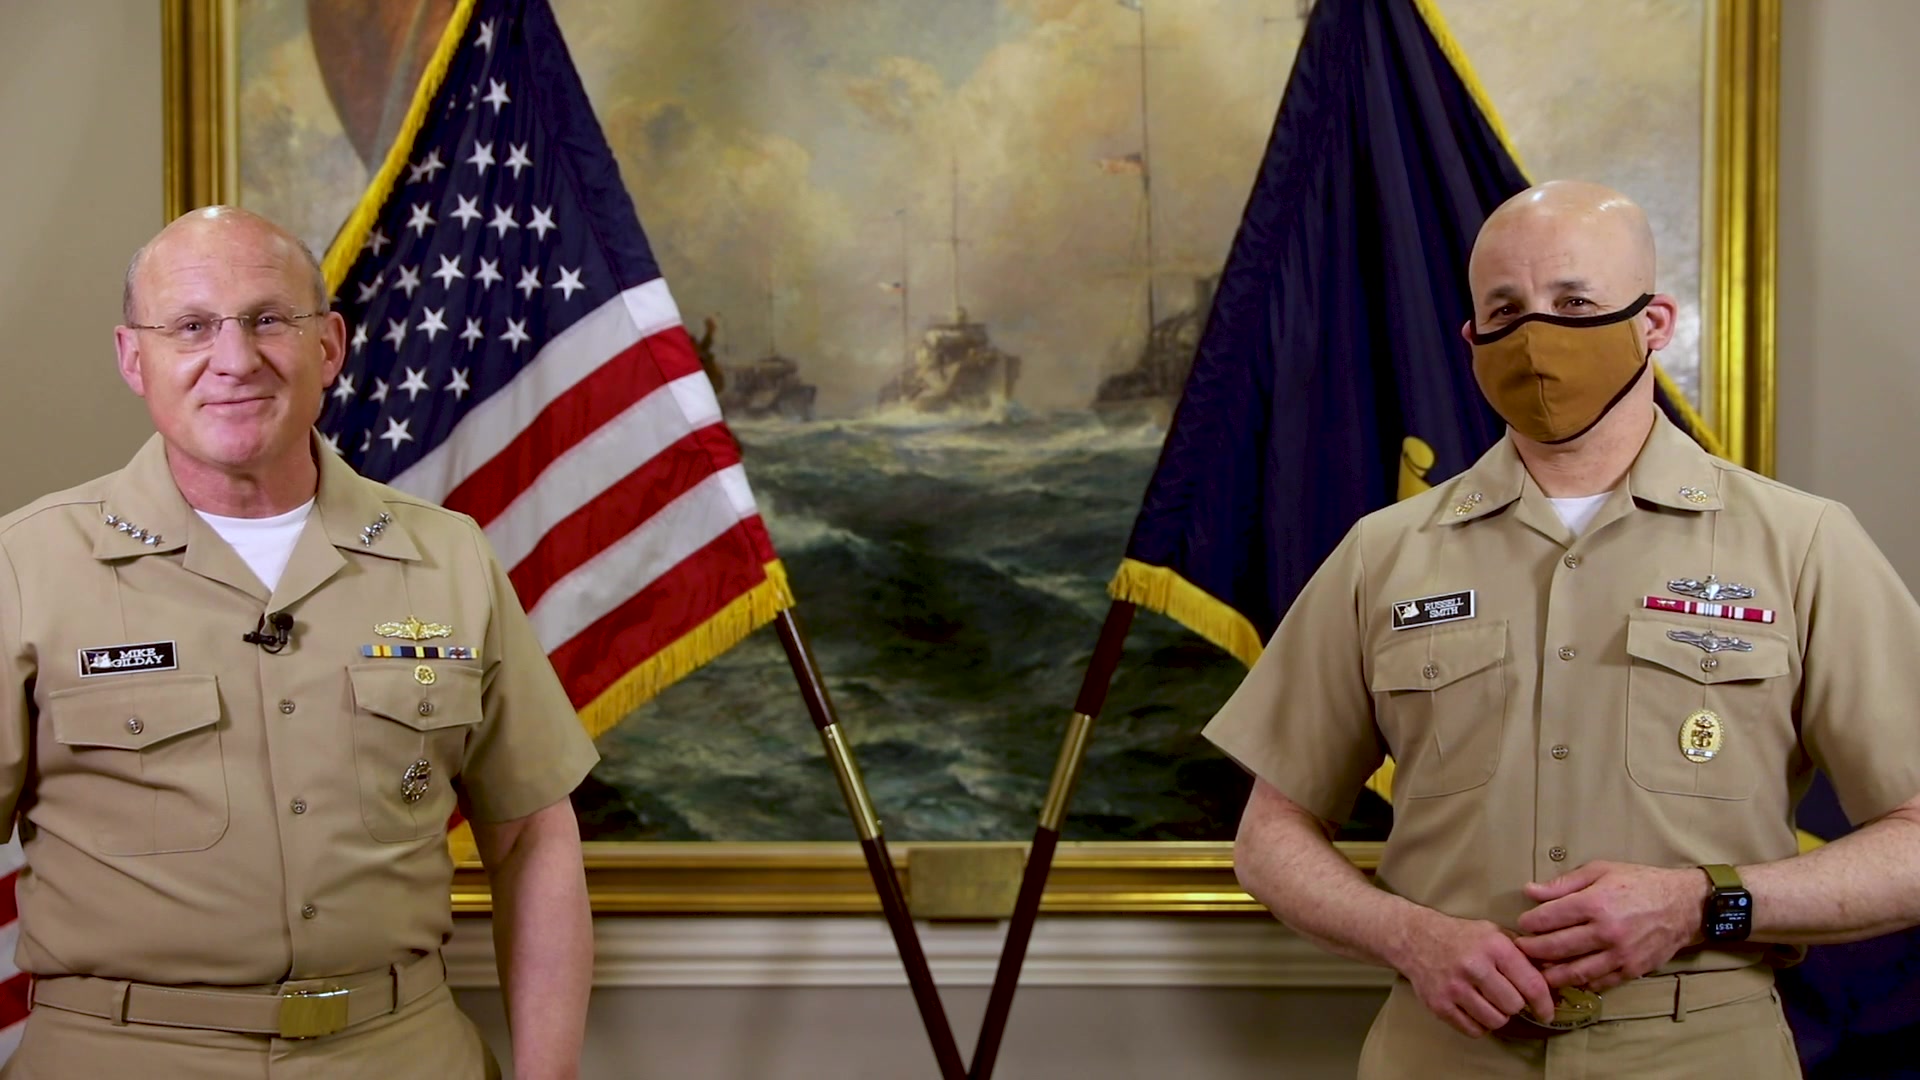 210126-N-TR763-2001 WASHINGTON (Jan. 26, 2021) A video slate for Chief of Naval Operations (CNO) Adm. Mike Gilday and Master Chief Petty Officer of the Navy (MCPON) Russ Smith's message to the Fleet regarding the COVID-19 vaccine. (U.S. Navy Graphic by Chief Mass Communication Specialist Nick Brown/Released)